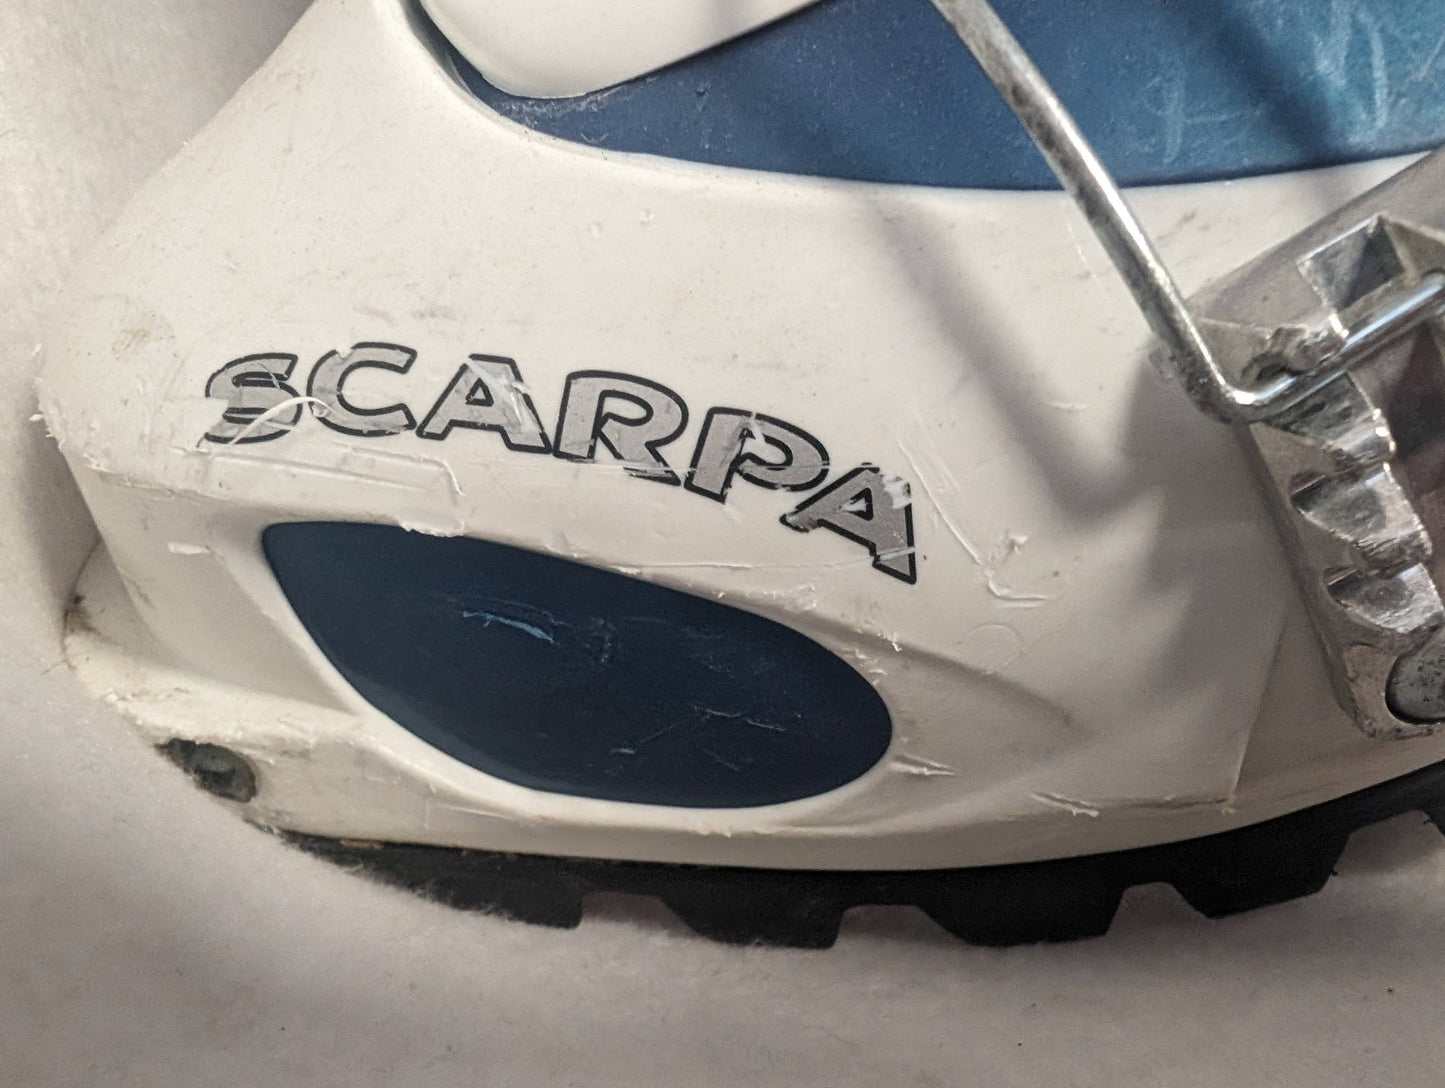 Scarpa Diva AT XC Ski Boots Size 27.5 Color White Condition Used